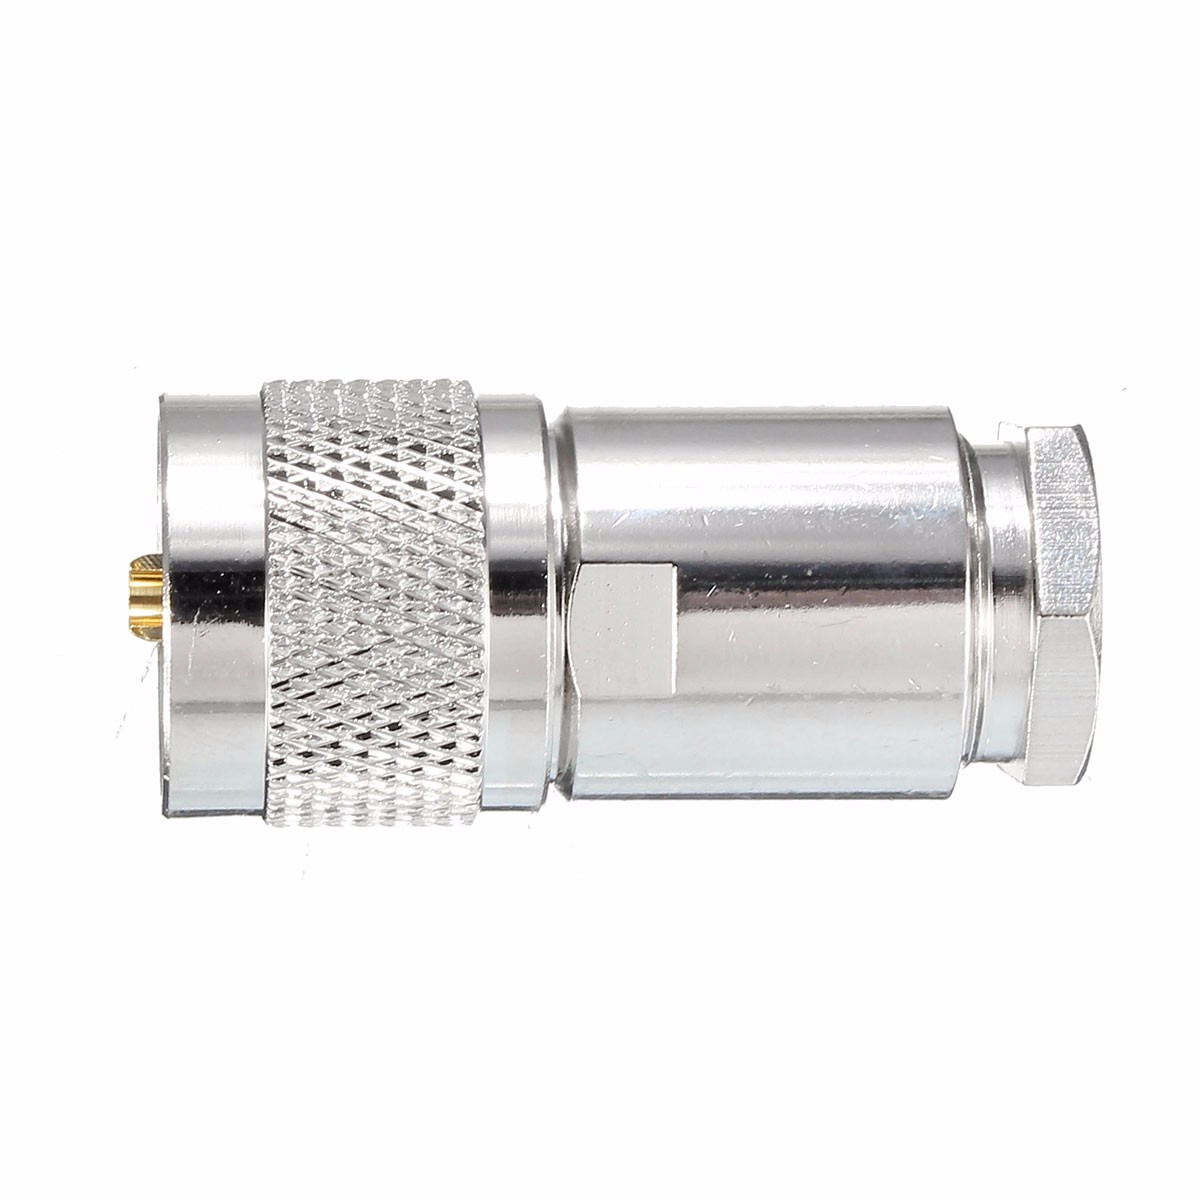 1Pc-UHF-Male-PL259-Clamp-Vers-RG8-RG165-LMR400-Cable-RF-Connector-Adapter-1072493